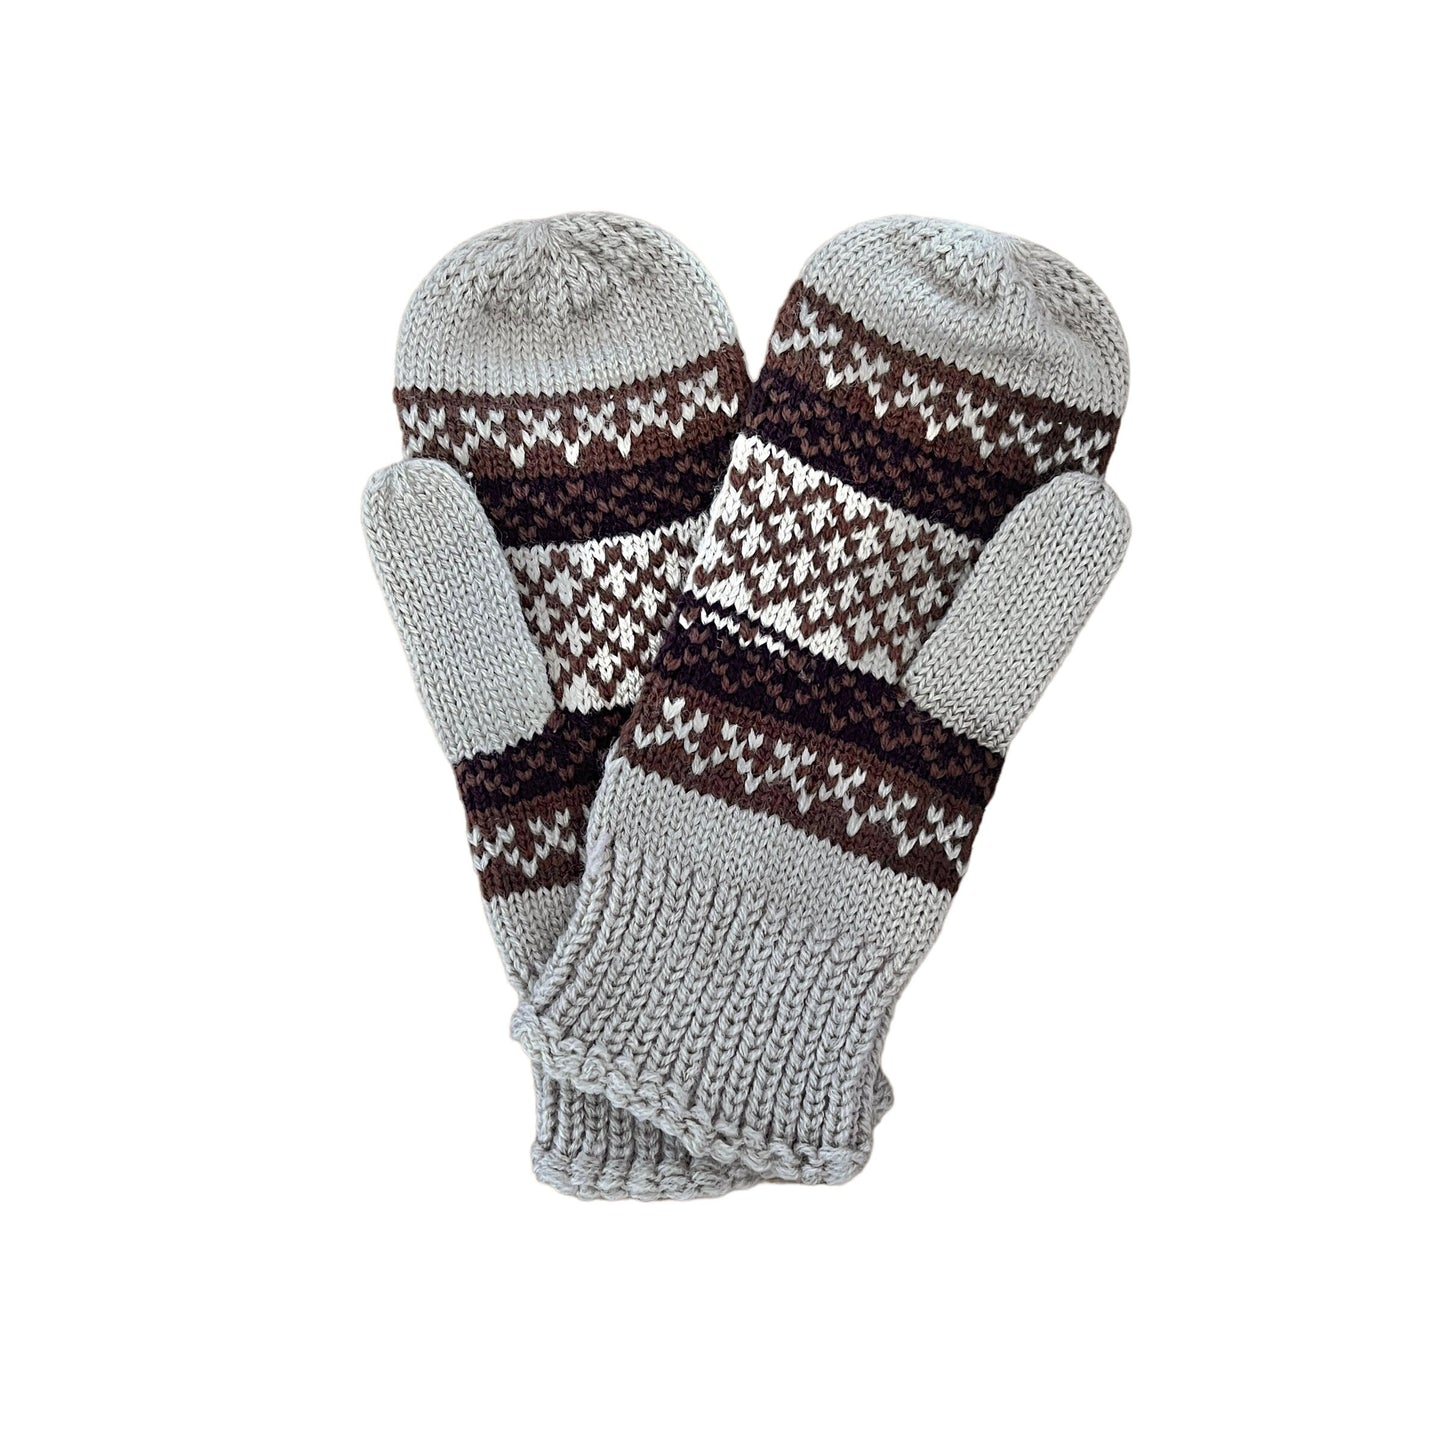 Vintage 70s Knitted Brown Mittens